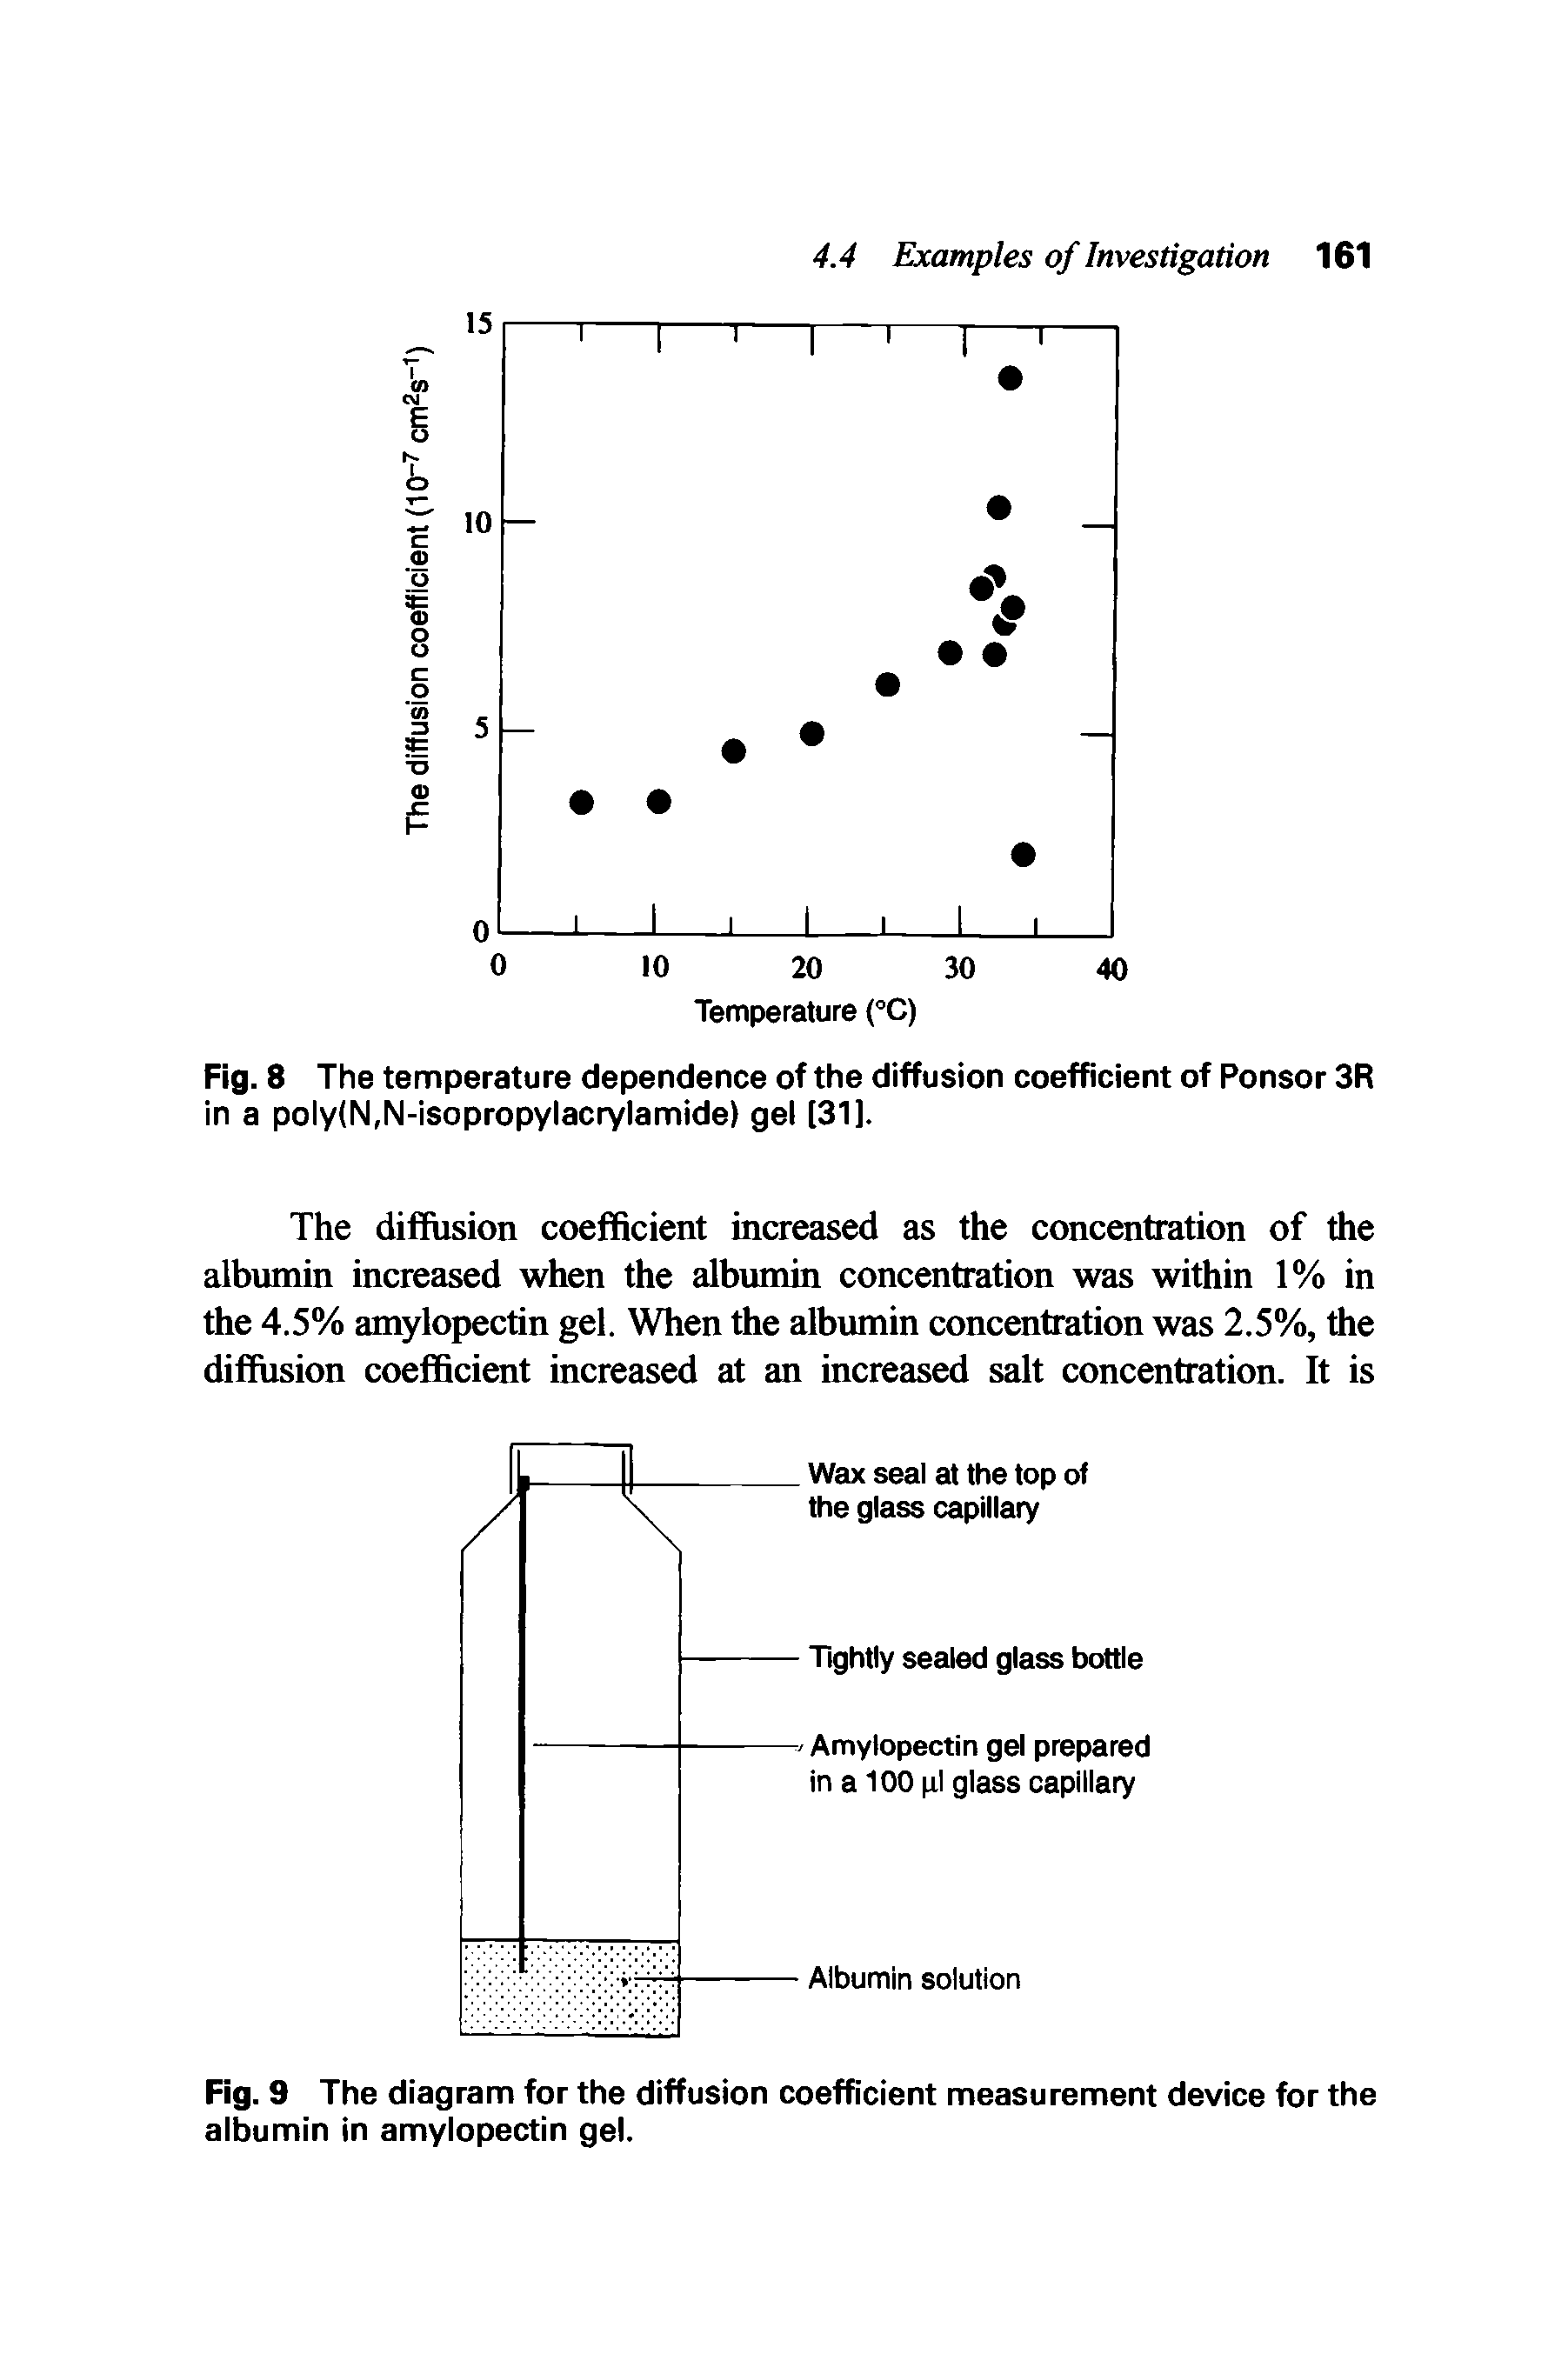 Fig. 8 The temperature dependence of the diffusion coefficient of Ponsor 3R in a poly(N,N-isopropylacrylamide) gel [31].